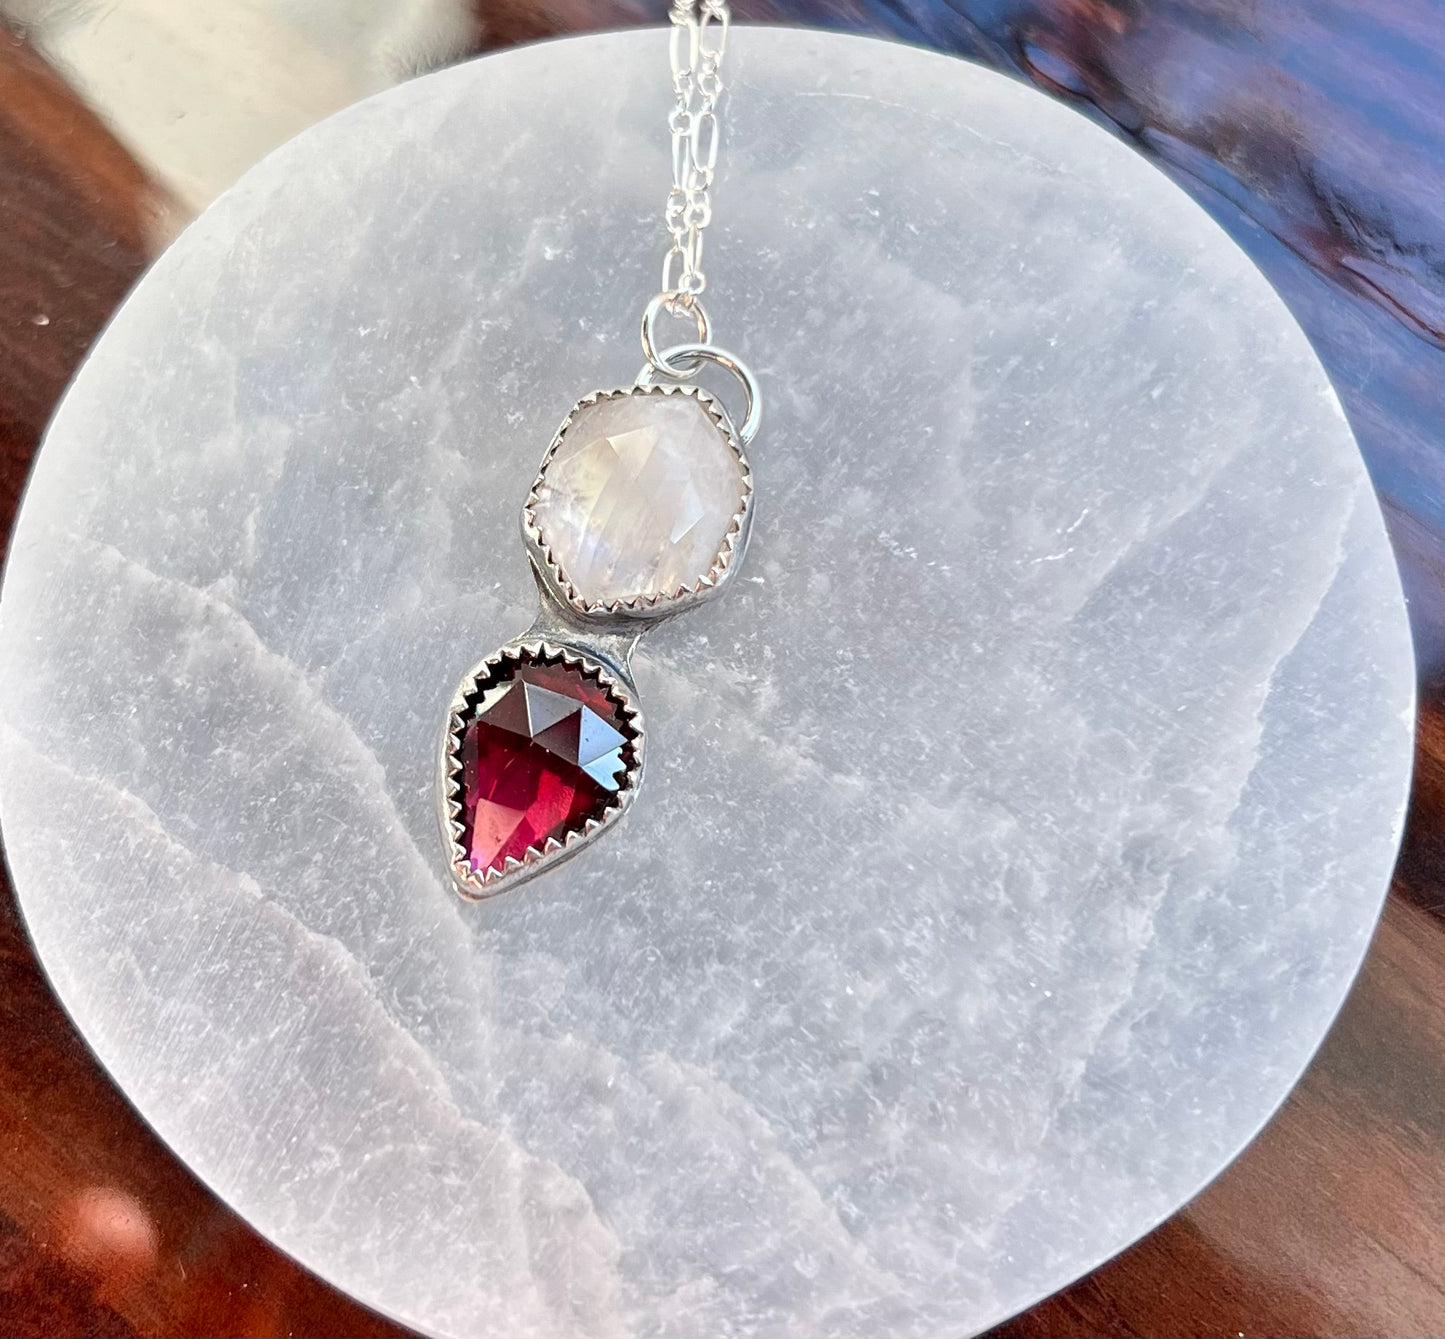 Moonstone and B L O O D Garnet Sterling Silver Necklace